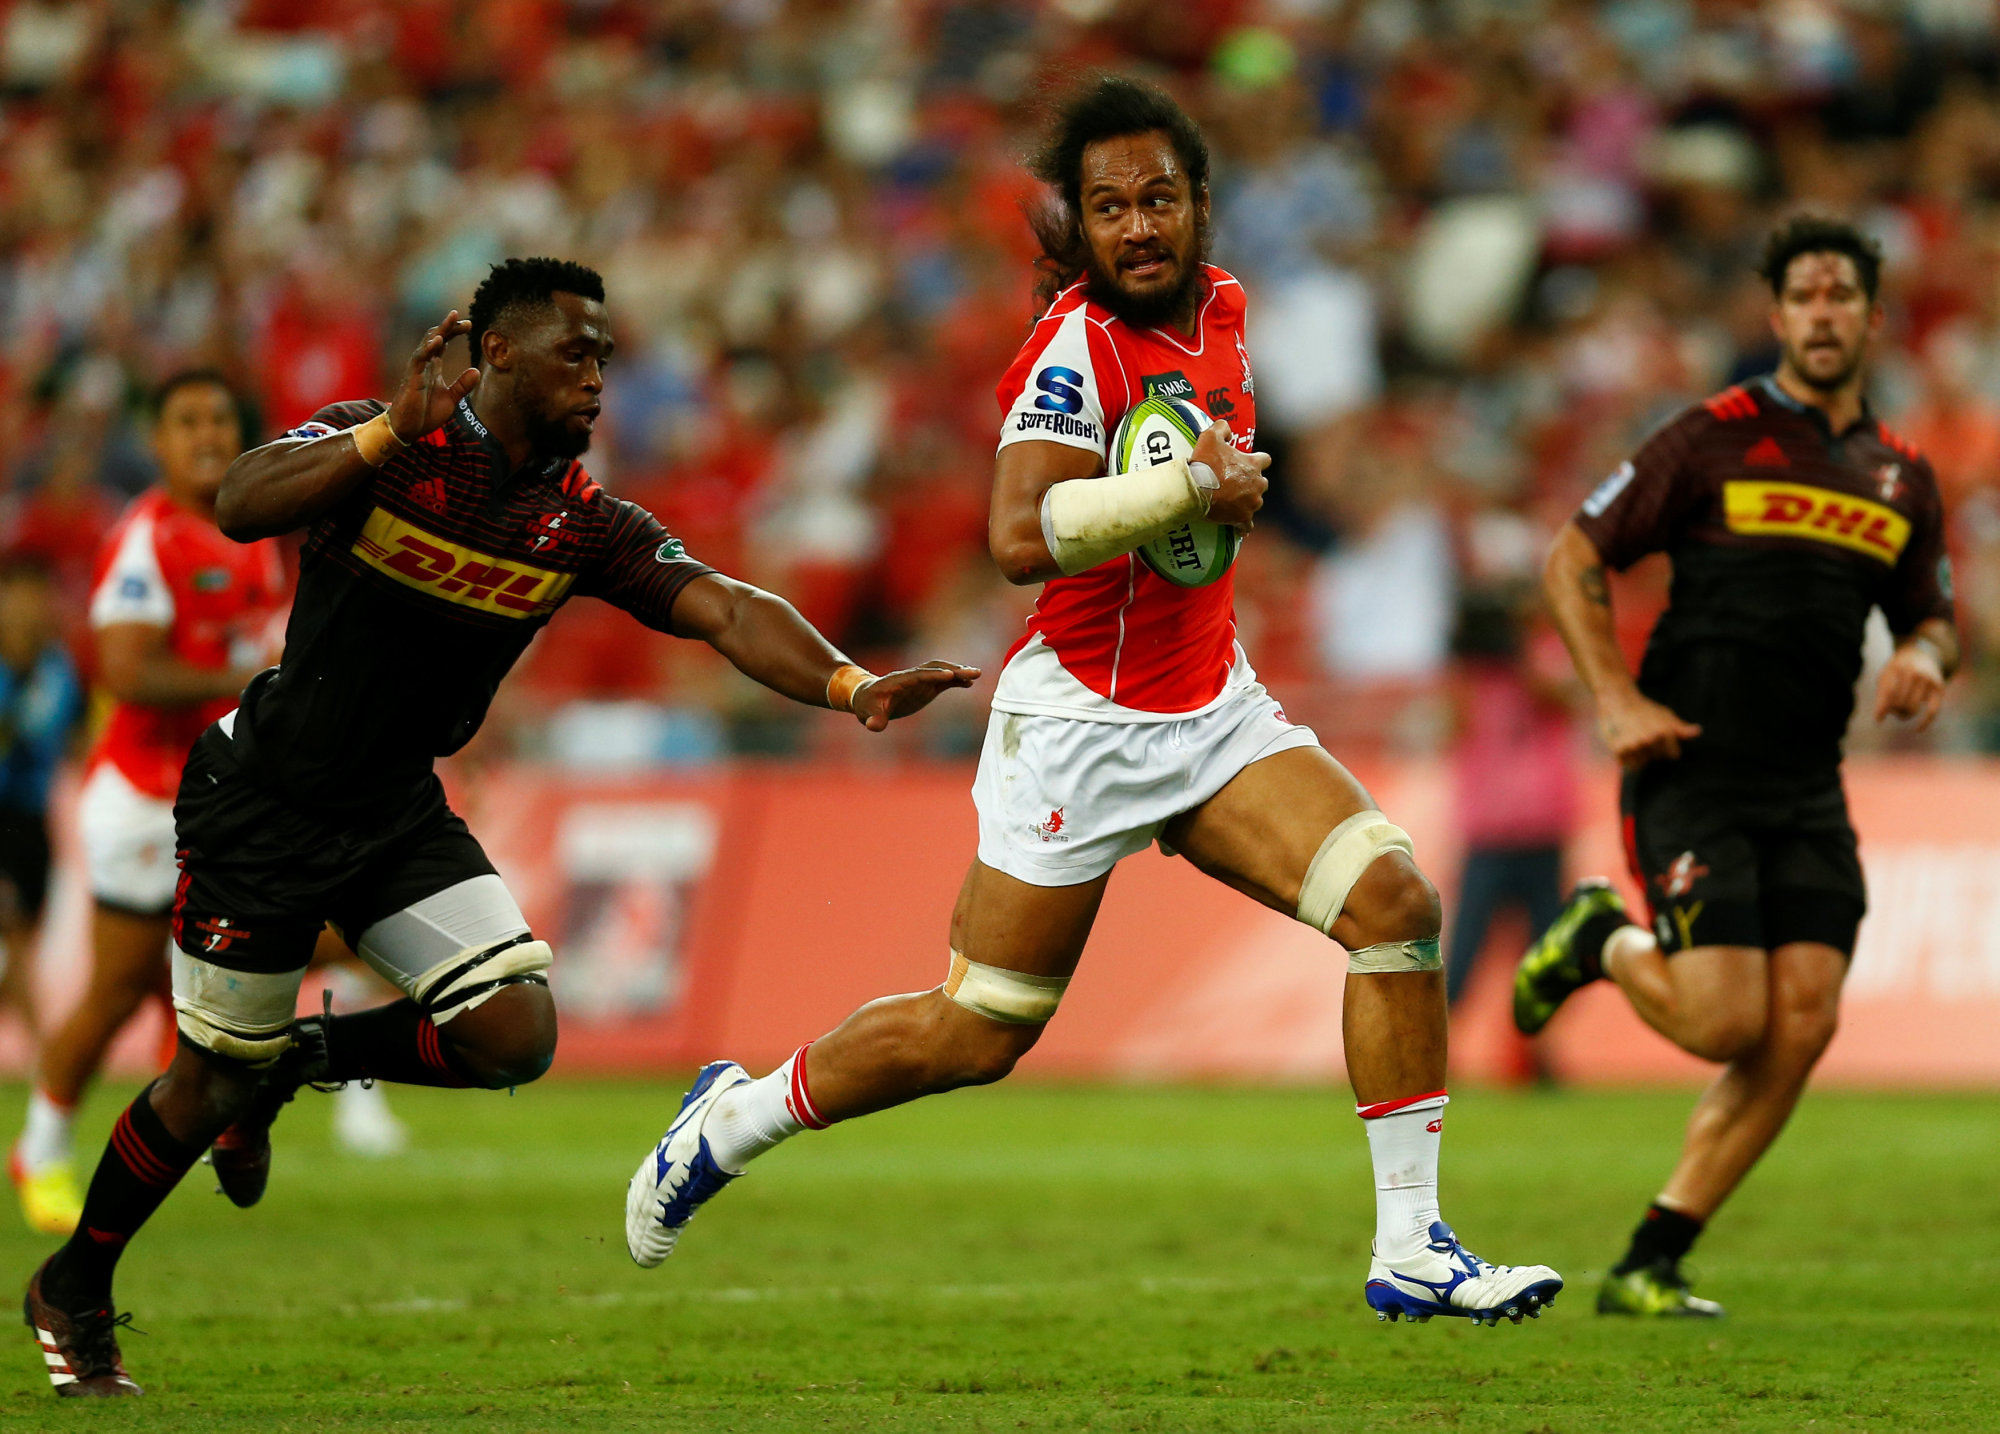 Triumphant Stormers finish strong against Sunwolves